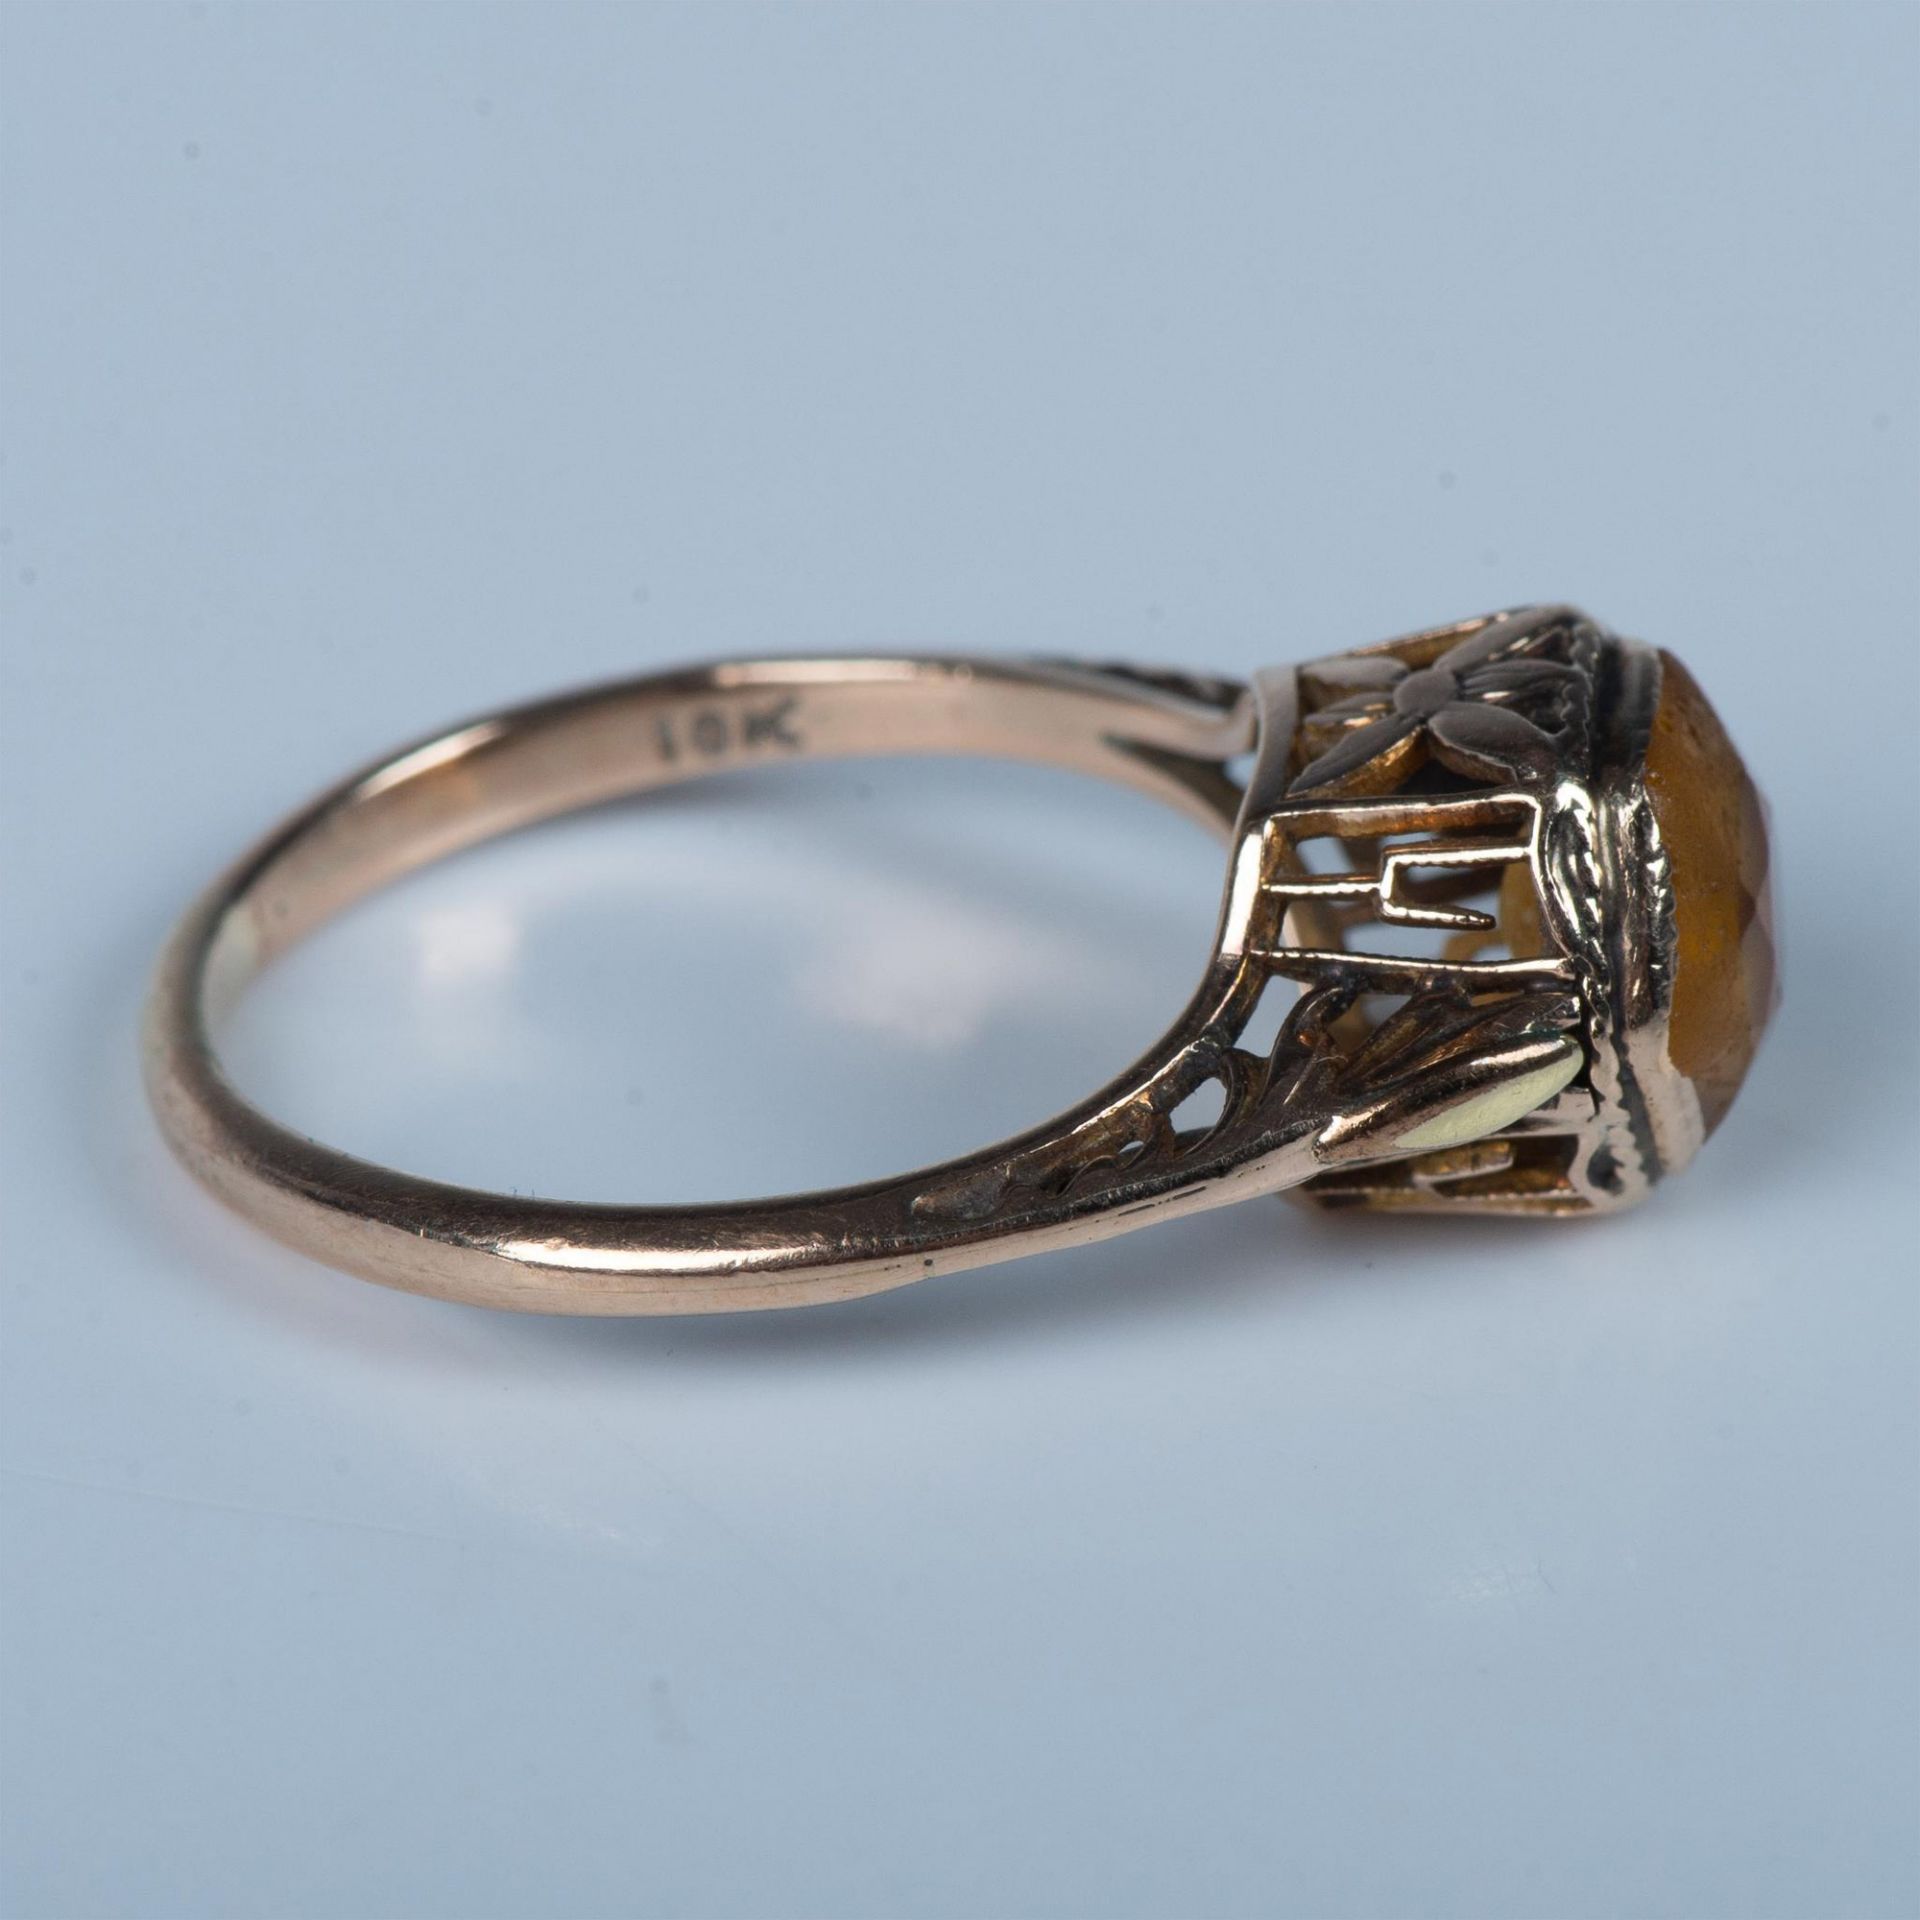 Vintage 10K Yellow Gold & Citrine Ring - Image 4 of 5